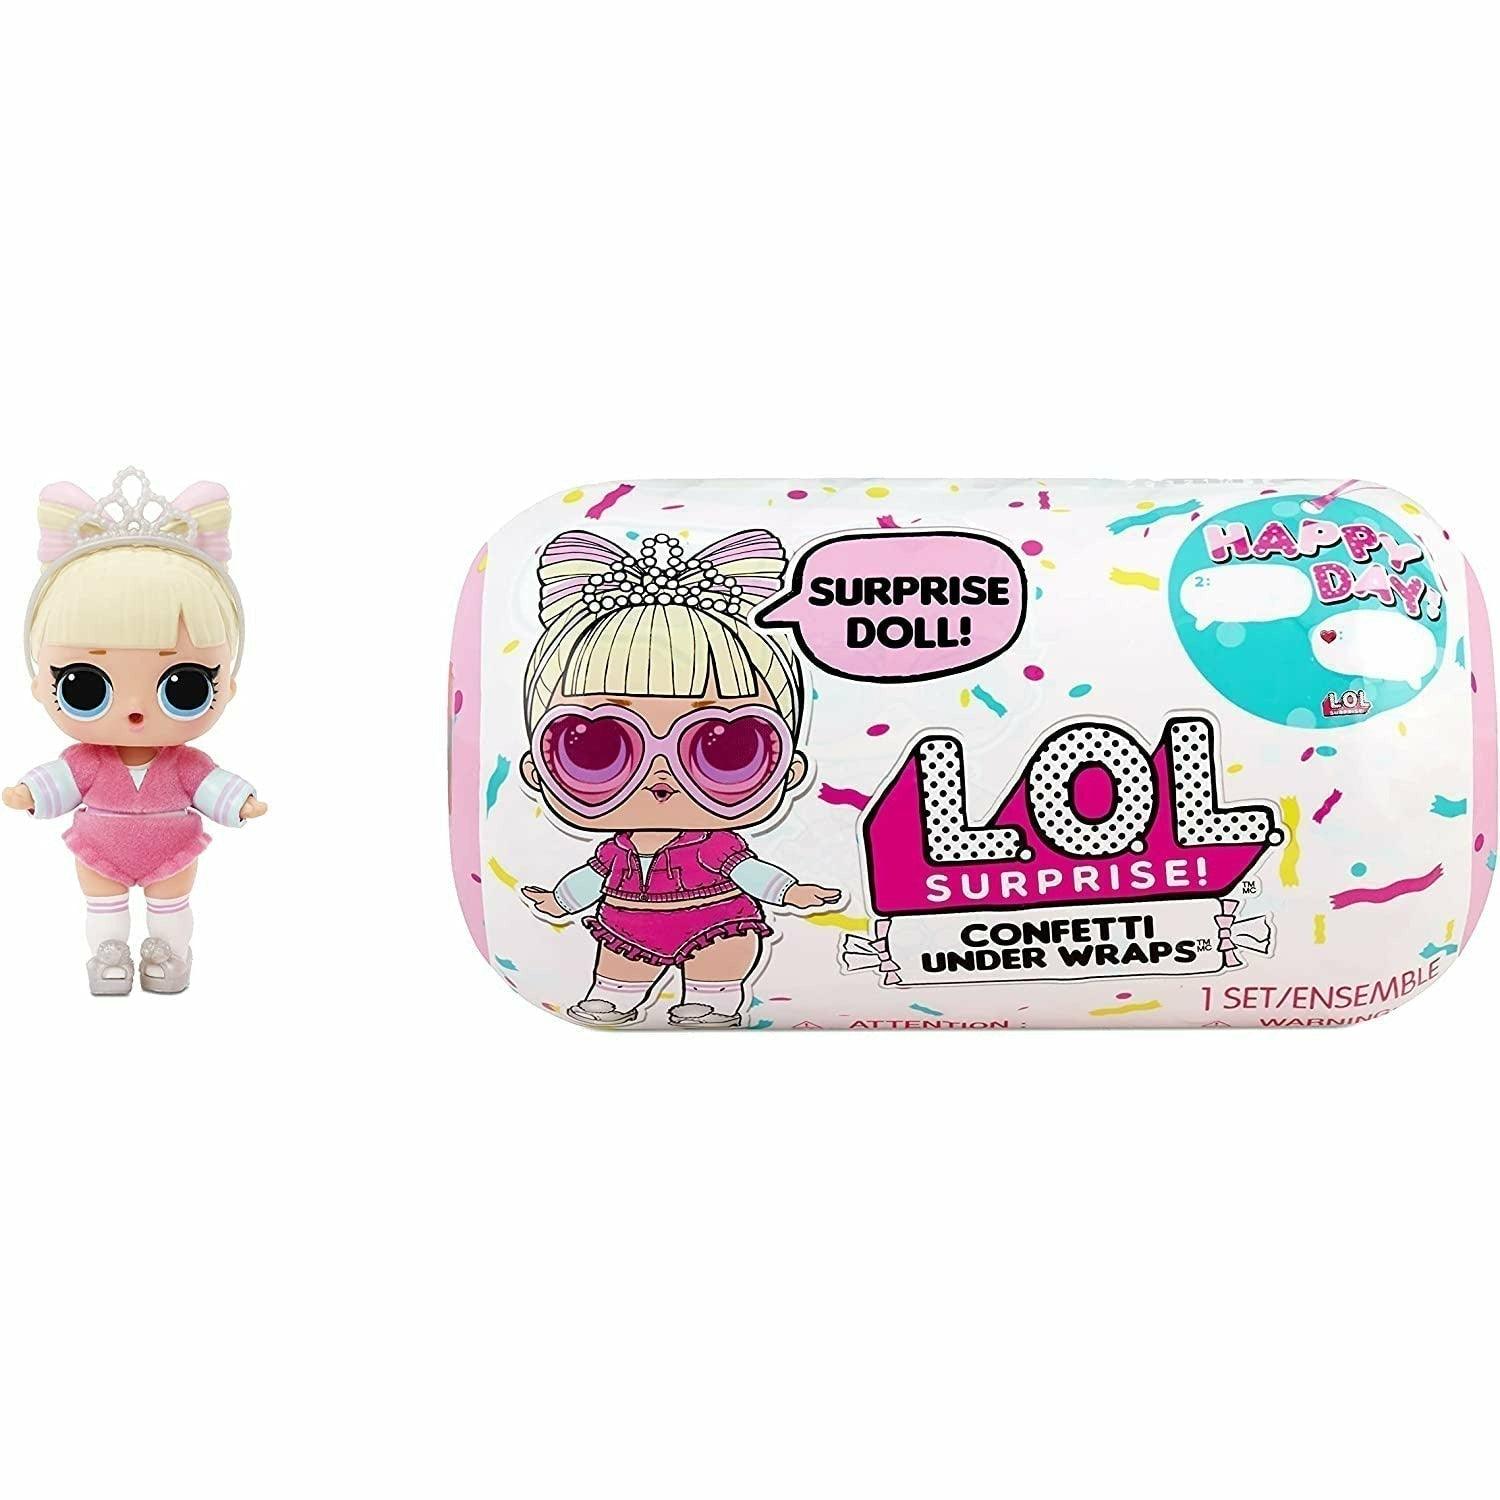 L.O.L Surprise Confetti Reveal Including Collectible Doll & Confetti Pop Fashion Outfits With 15 Surprises - BumbleToys - 5-7 Years, Clearance, Dolls, Fashion Dolls & Accessories, Girls, L.O.L, OXE